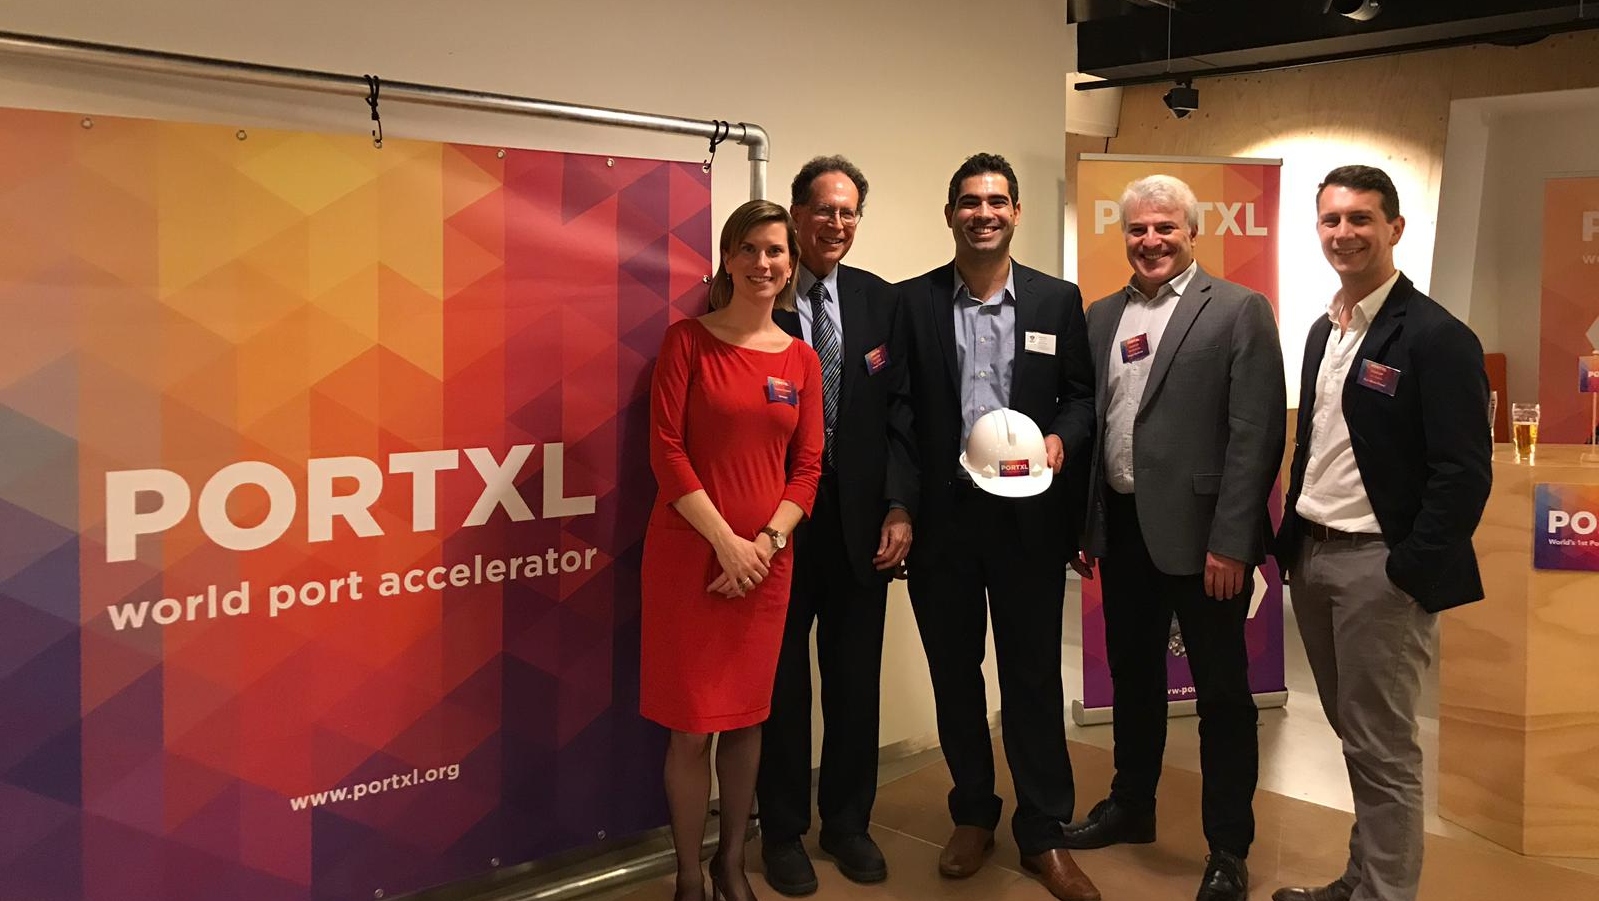 From left, Carolien Vat Sandee, CEO of PortXL Rotterdam; Dr. Daniel Farb of Flower Turbines; Osher Perry and Ilan Naslavsky of ShipIn; and Yair Rudick of Eco Wave Power. Photo by Marc Nolte